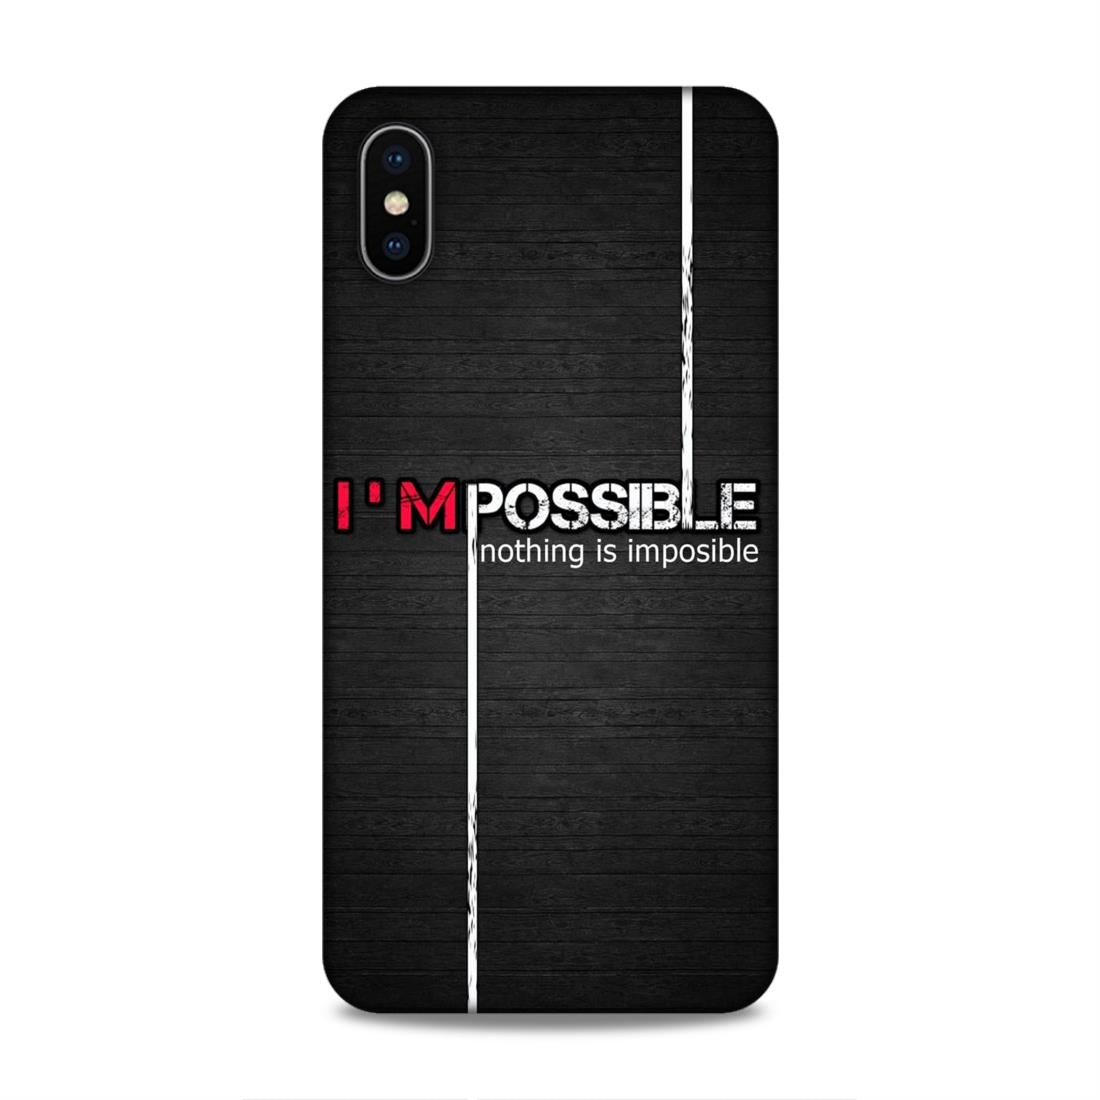 I'm Possible Hard Back Case For Apple iPhone XS Max